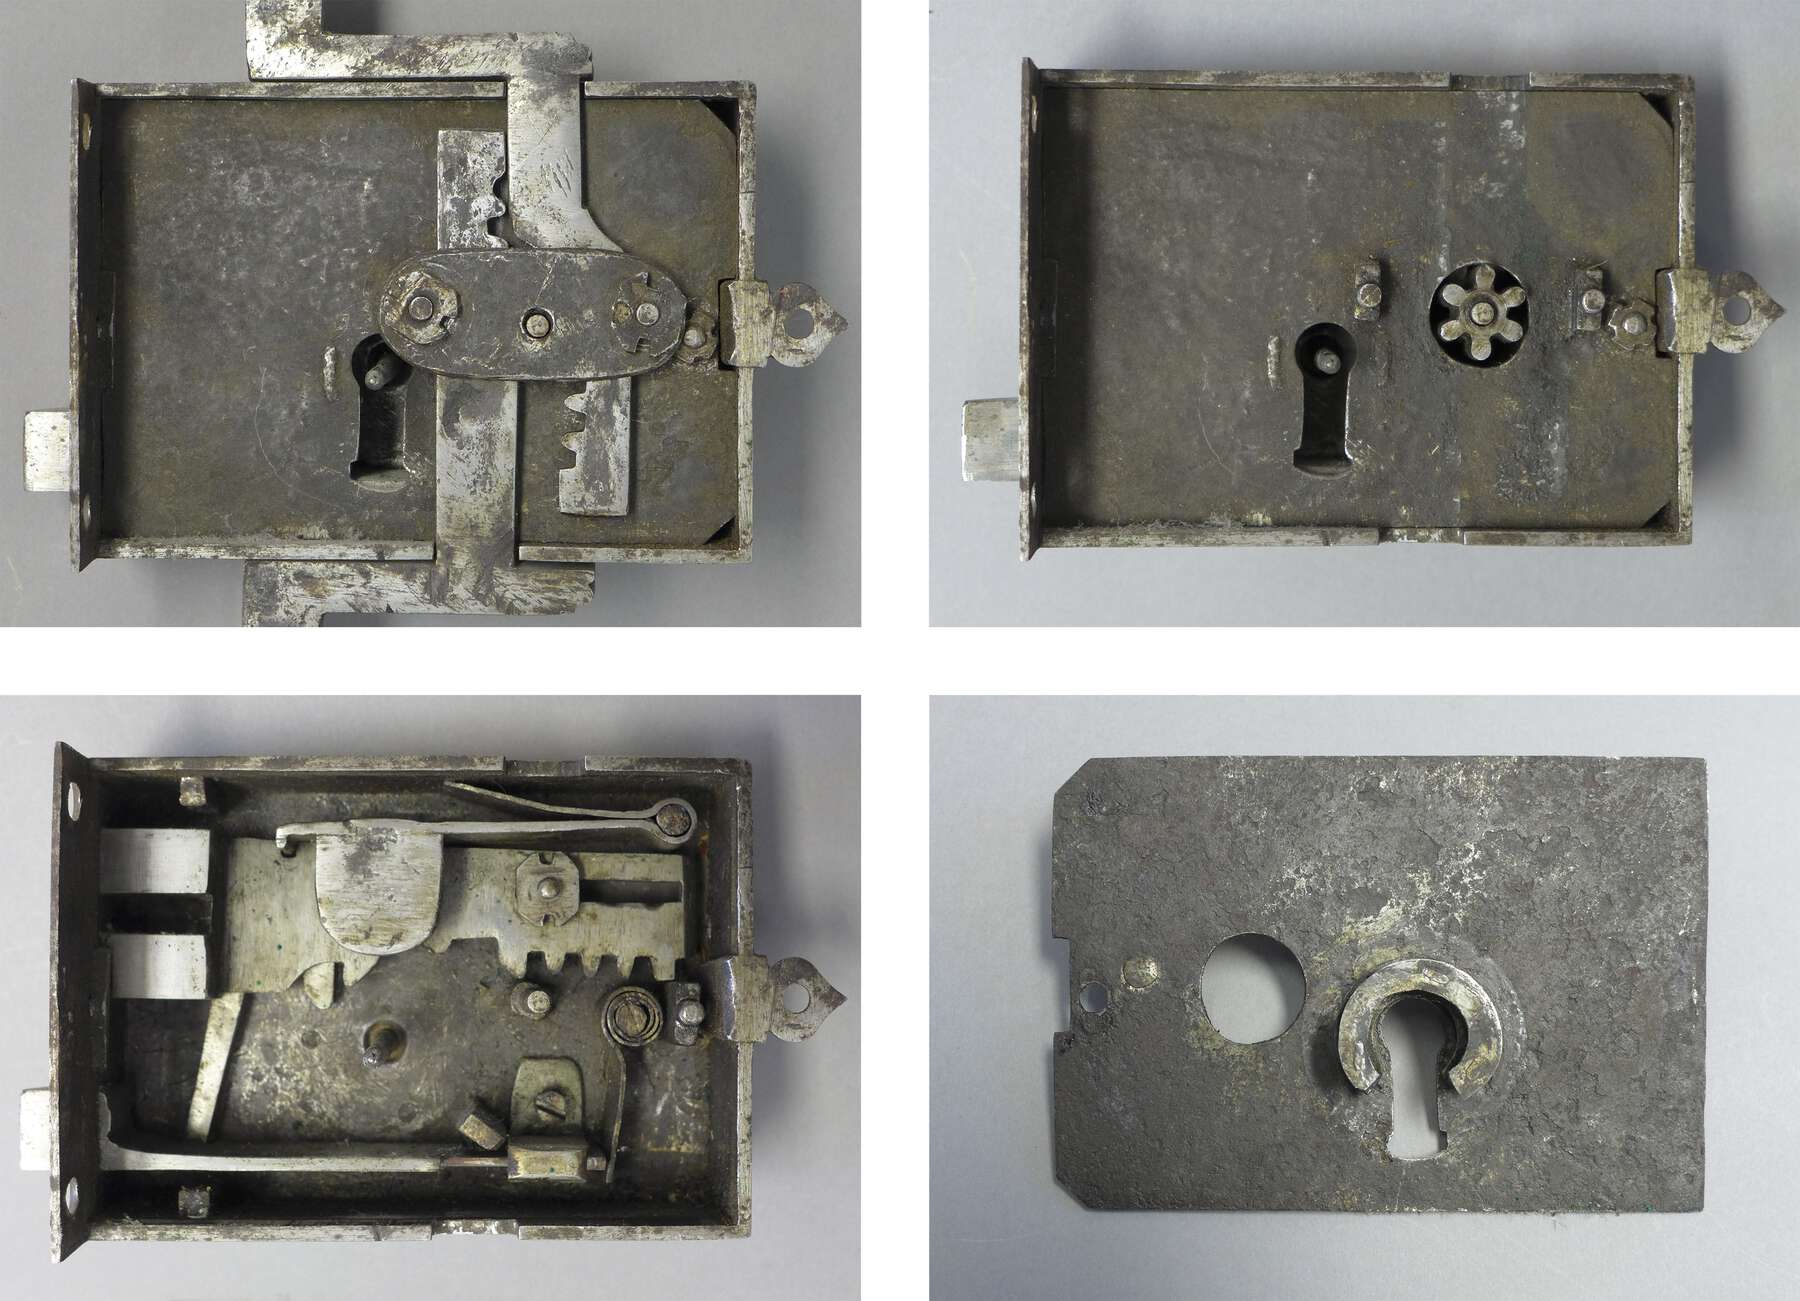 four views of a disassembled lock from the cabinet, revealing the gears and spring catch that make up the locking mechanism